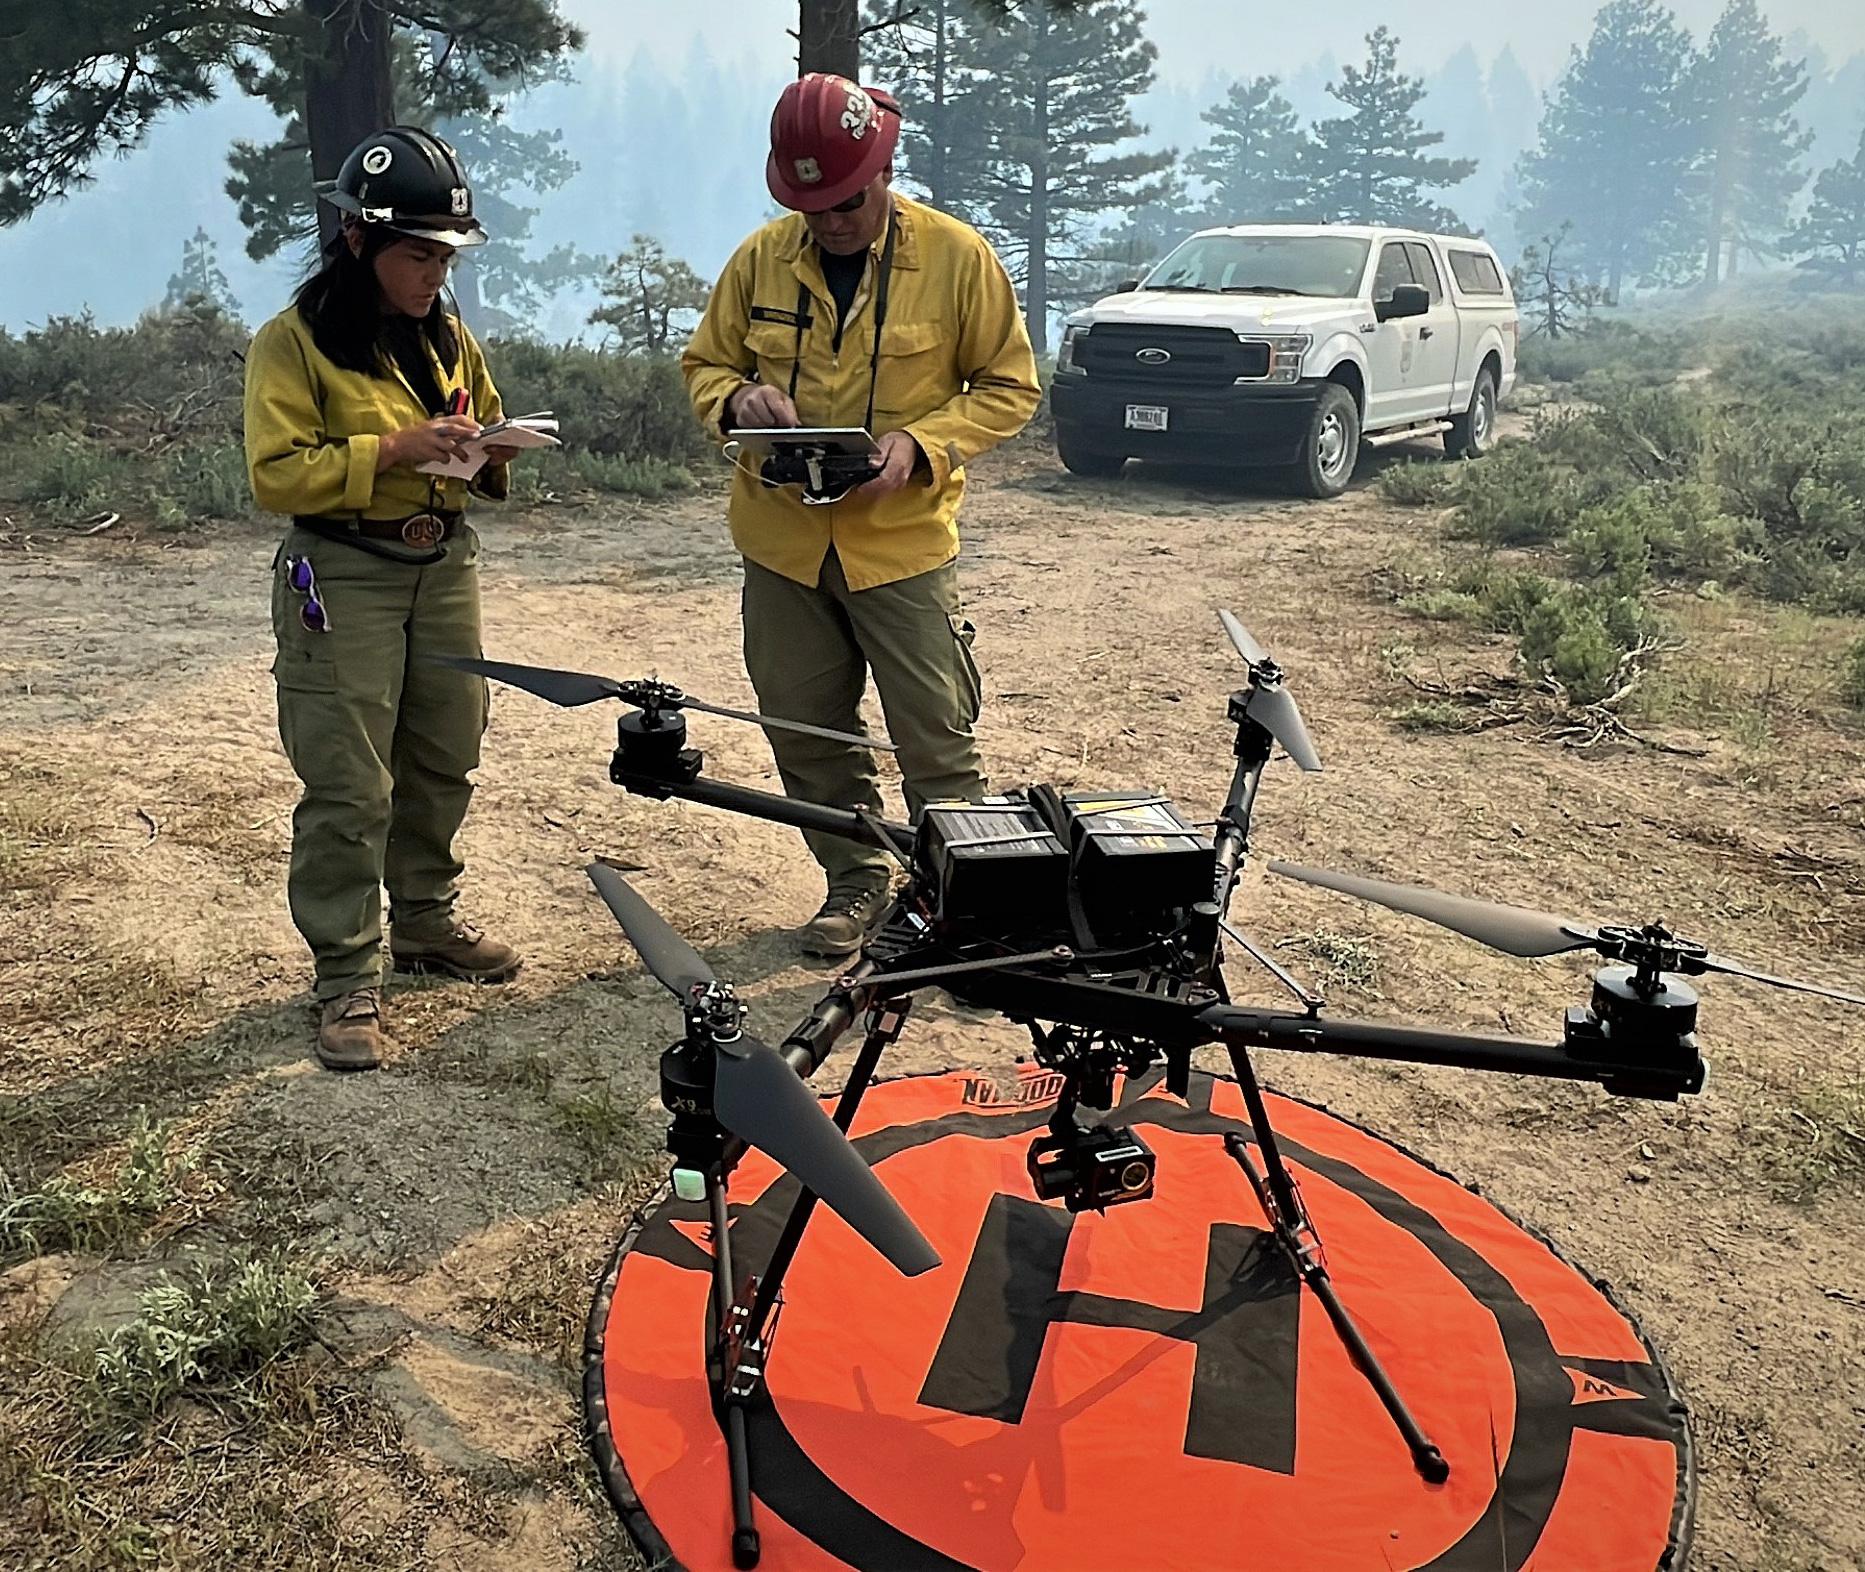 Two forest service employees stand next to a drone on an orange landing pad